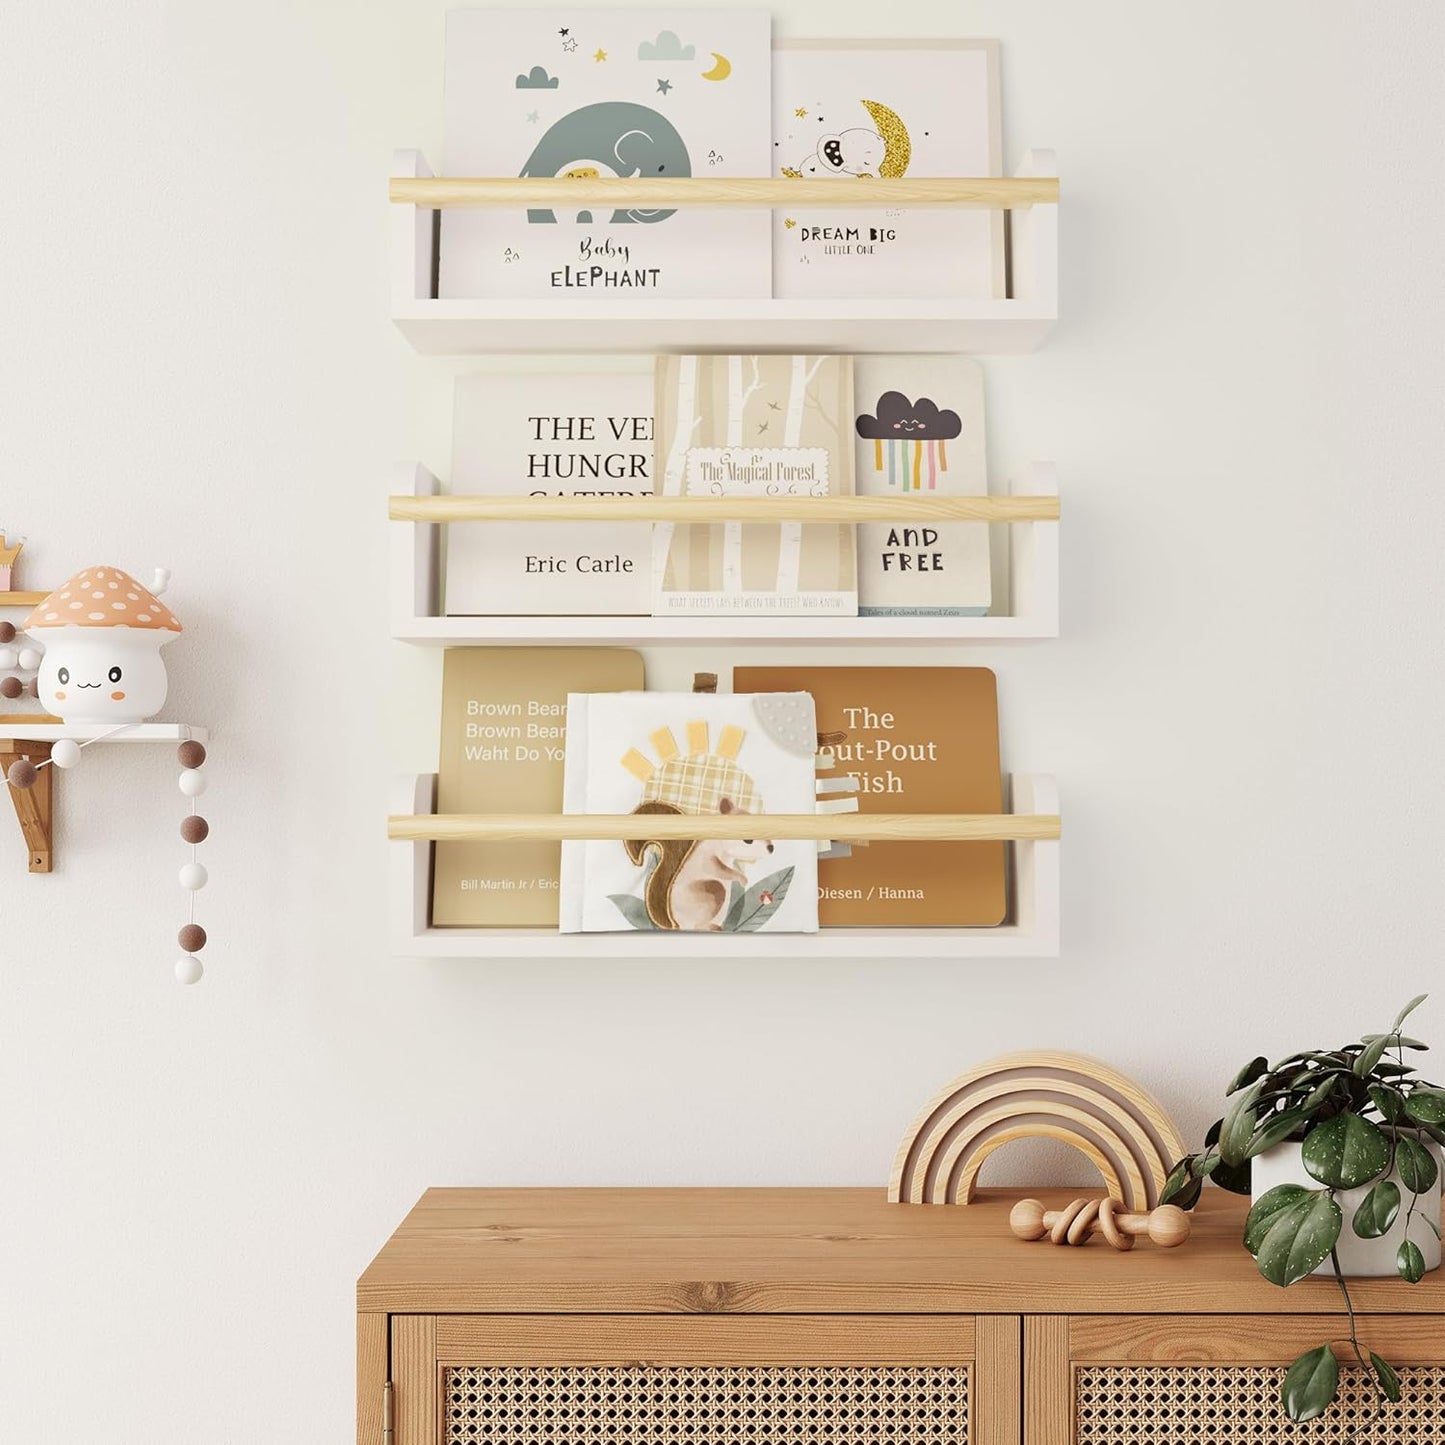 Decorative Nursery Bookshelves for Kids - Set of 3 Easy to Install Floating Shelves for Wall Mount - Beautiful Hanging Organizer Furniture for Your Baby Boy or Girl'S Bedroom and Play Room Decor